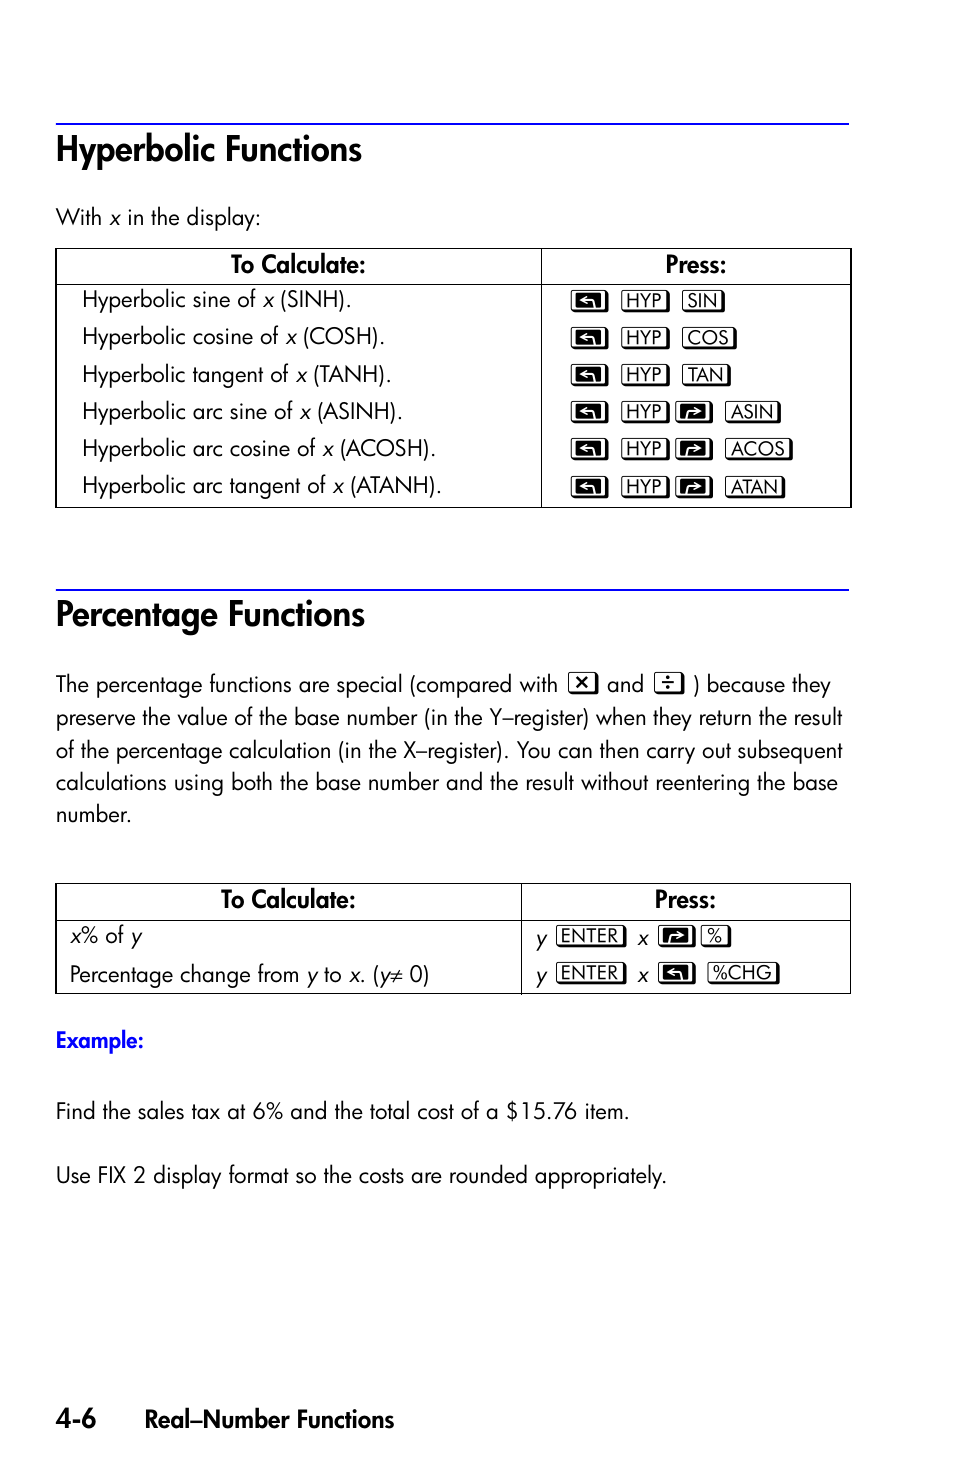 Hyperbolic functions, Percentage functions | HP 35s Scientific Calculator  User Manual | Page 80 / 382 | Original mode